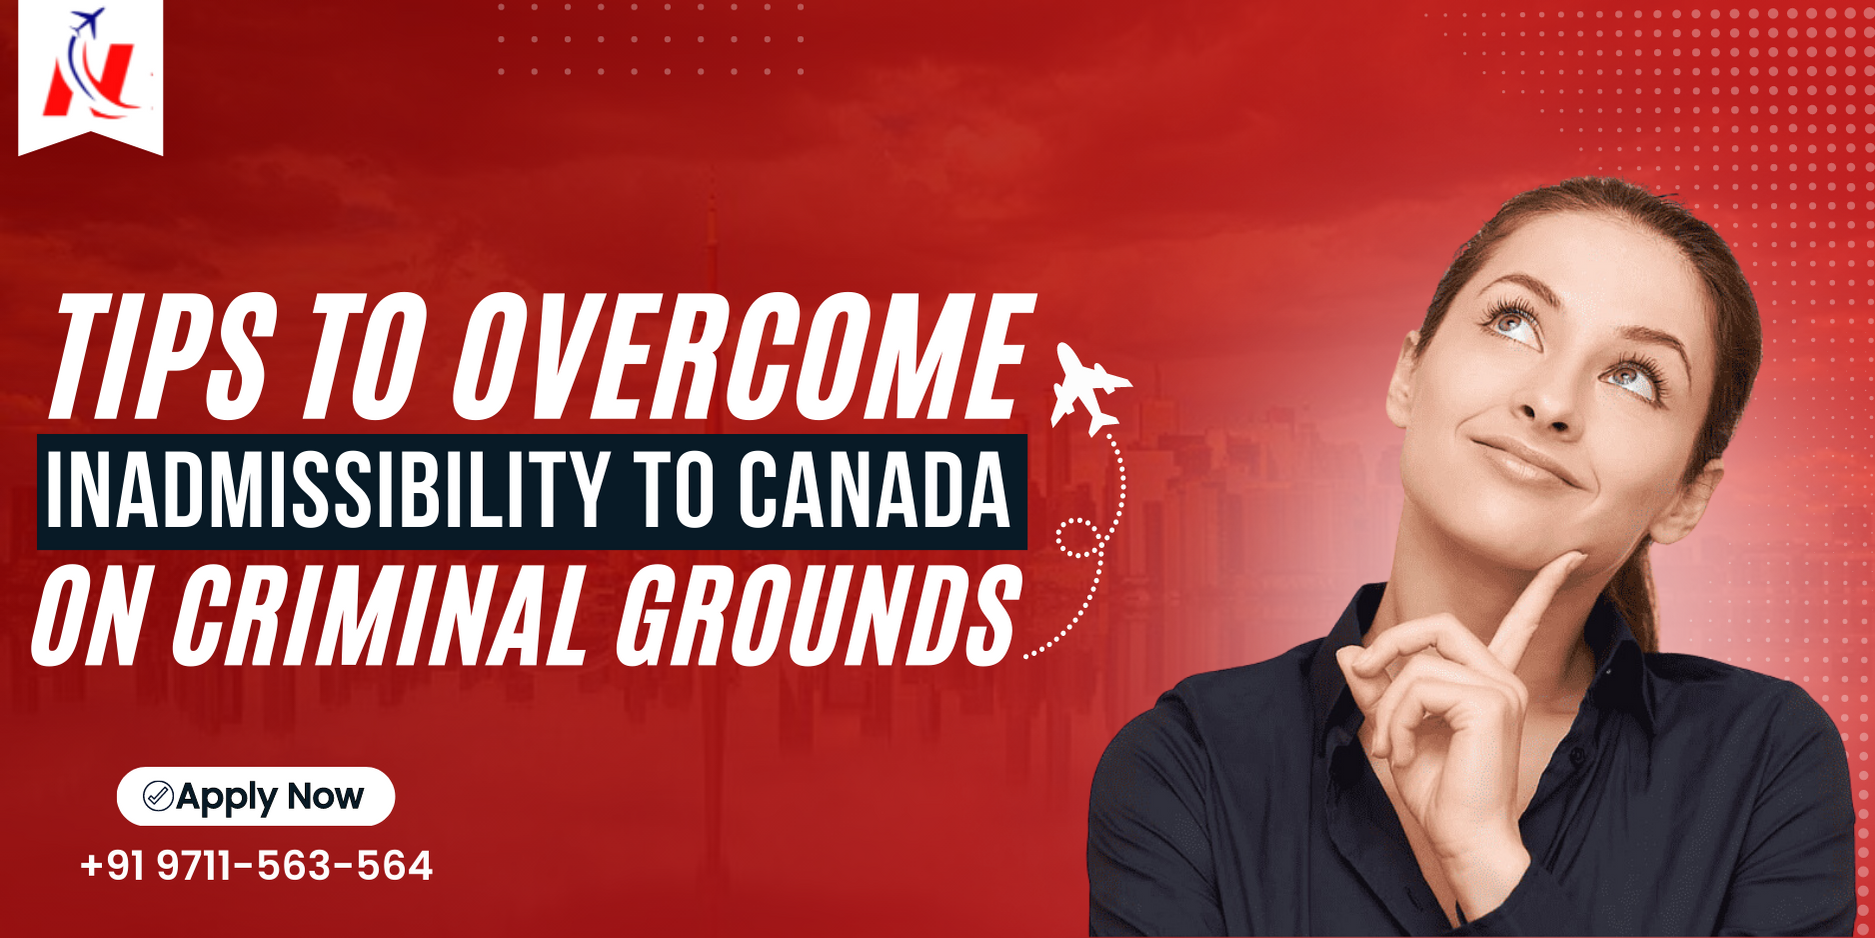 Tips to overcome inadmissibility to Canada on criminal grounds